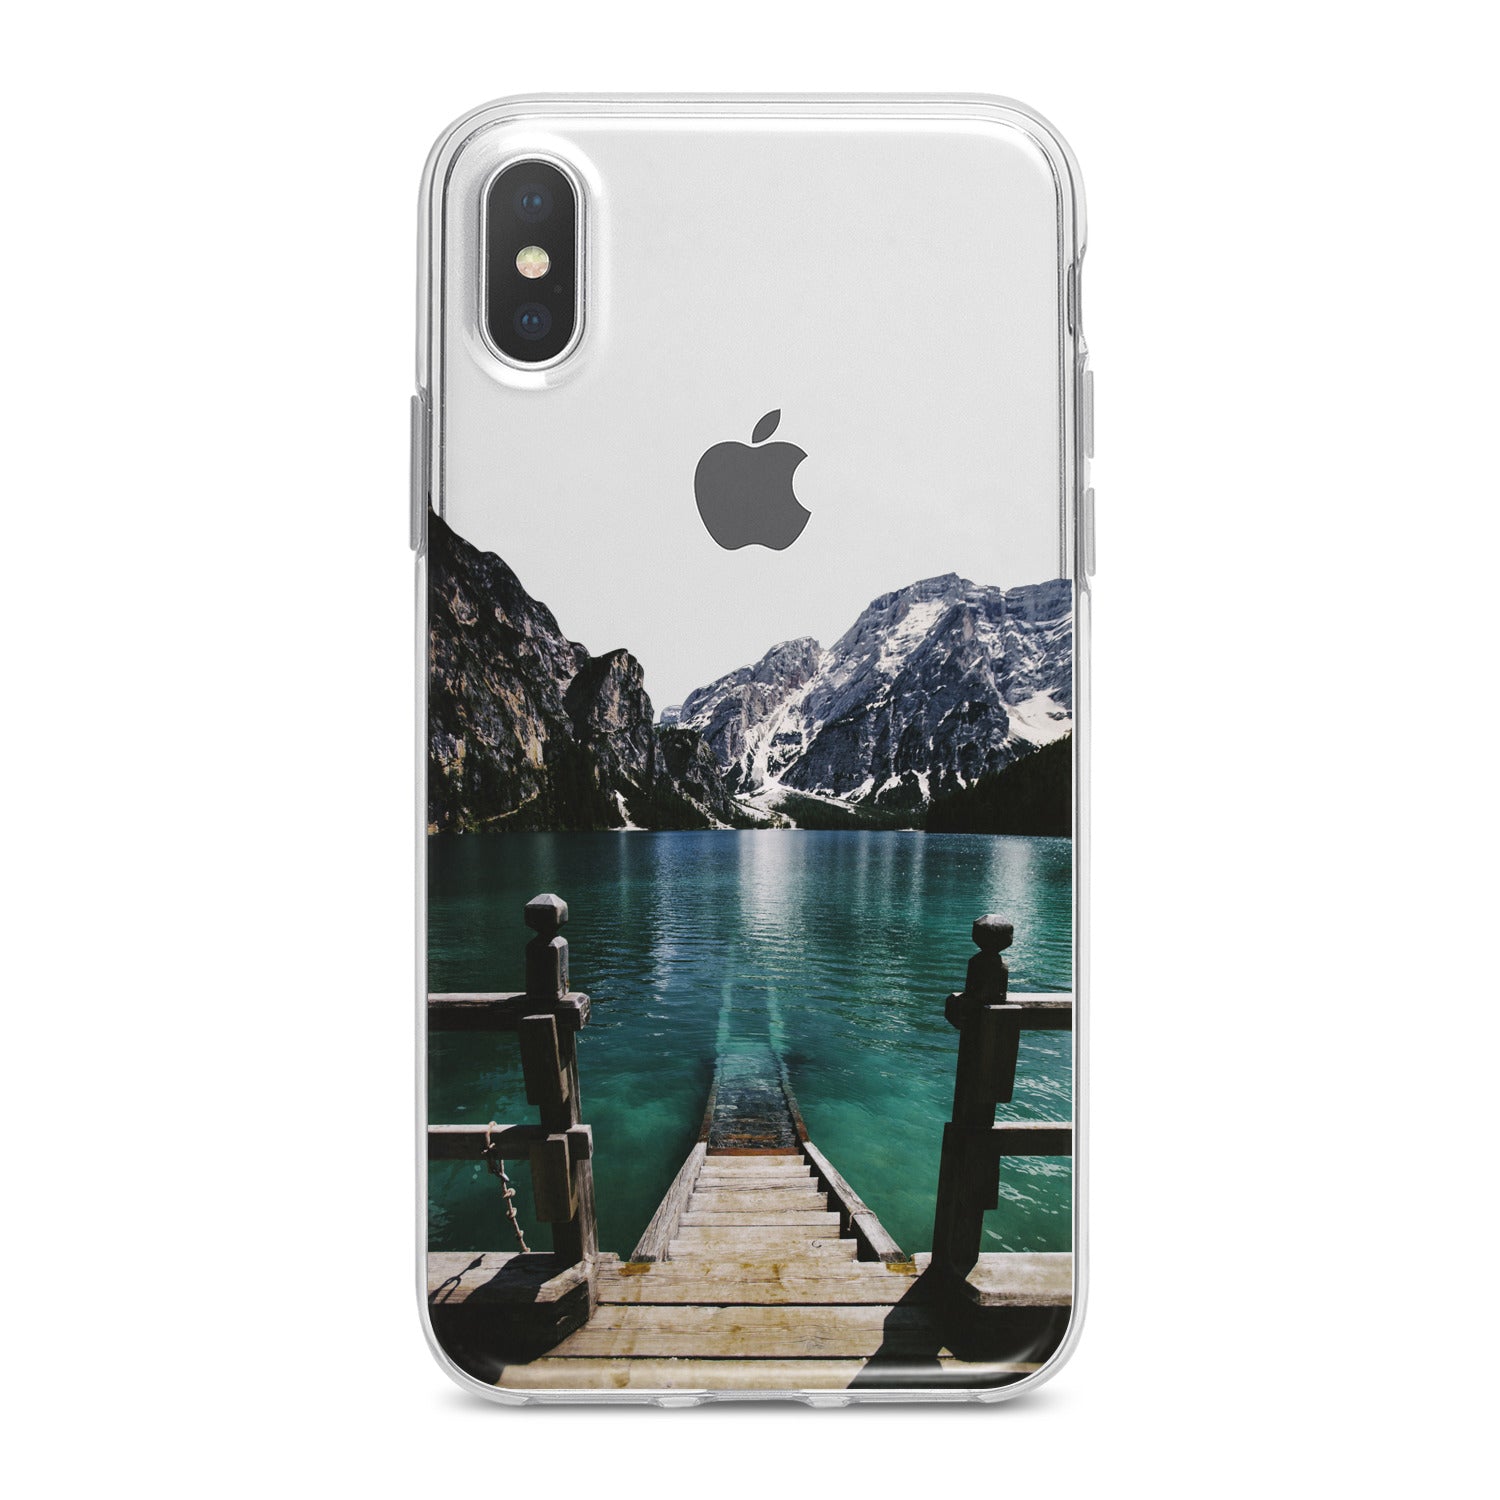 Lex Altern Night Bridge Phone Case for your iPhone & Android phone.